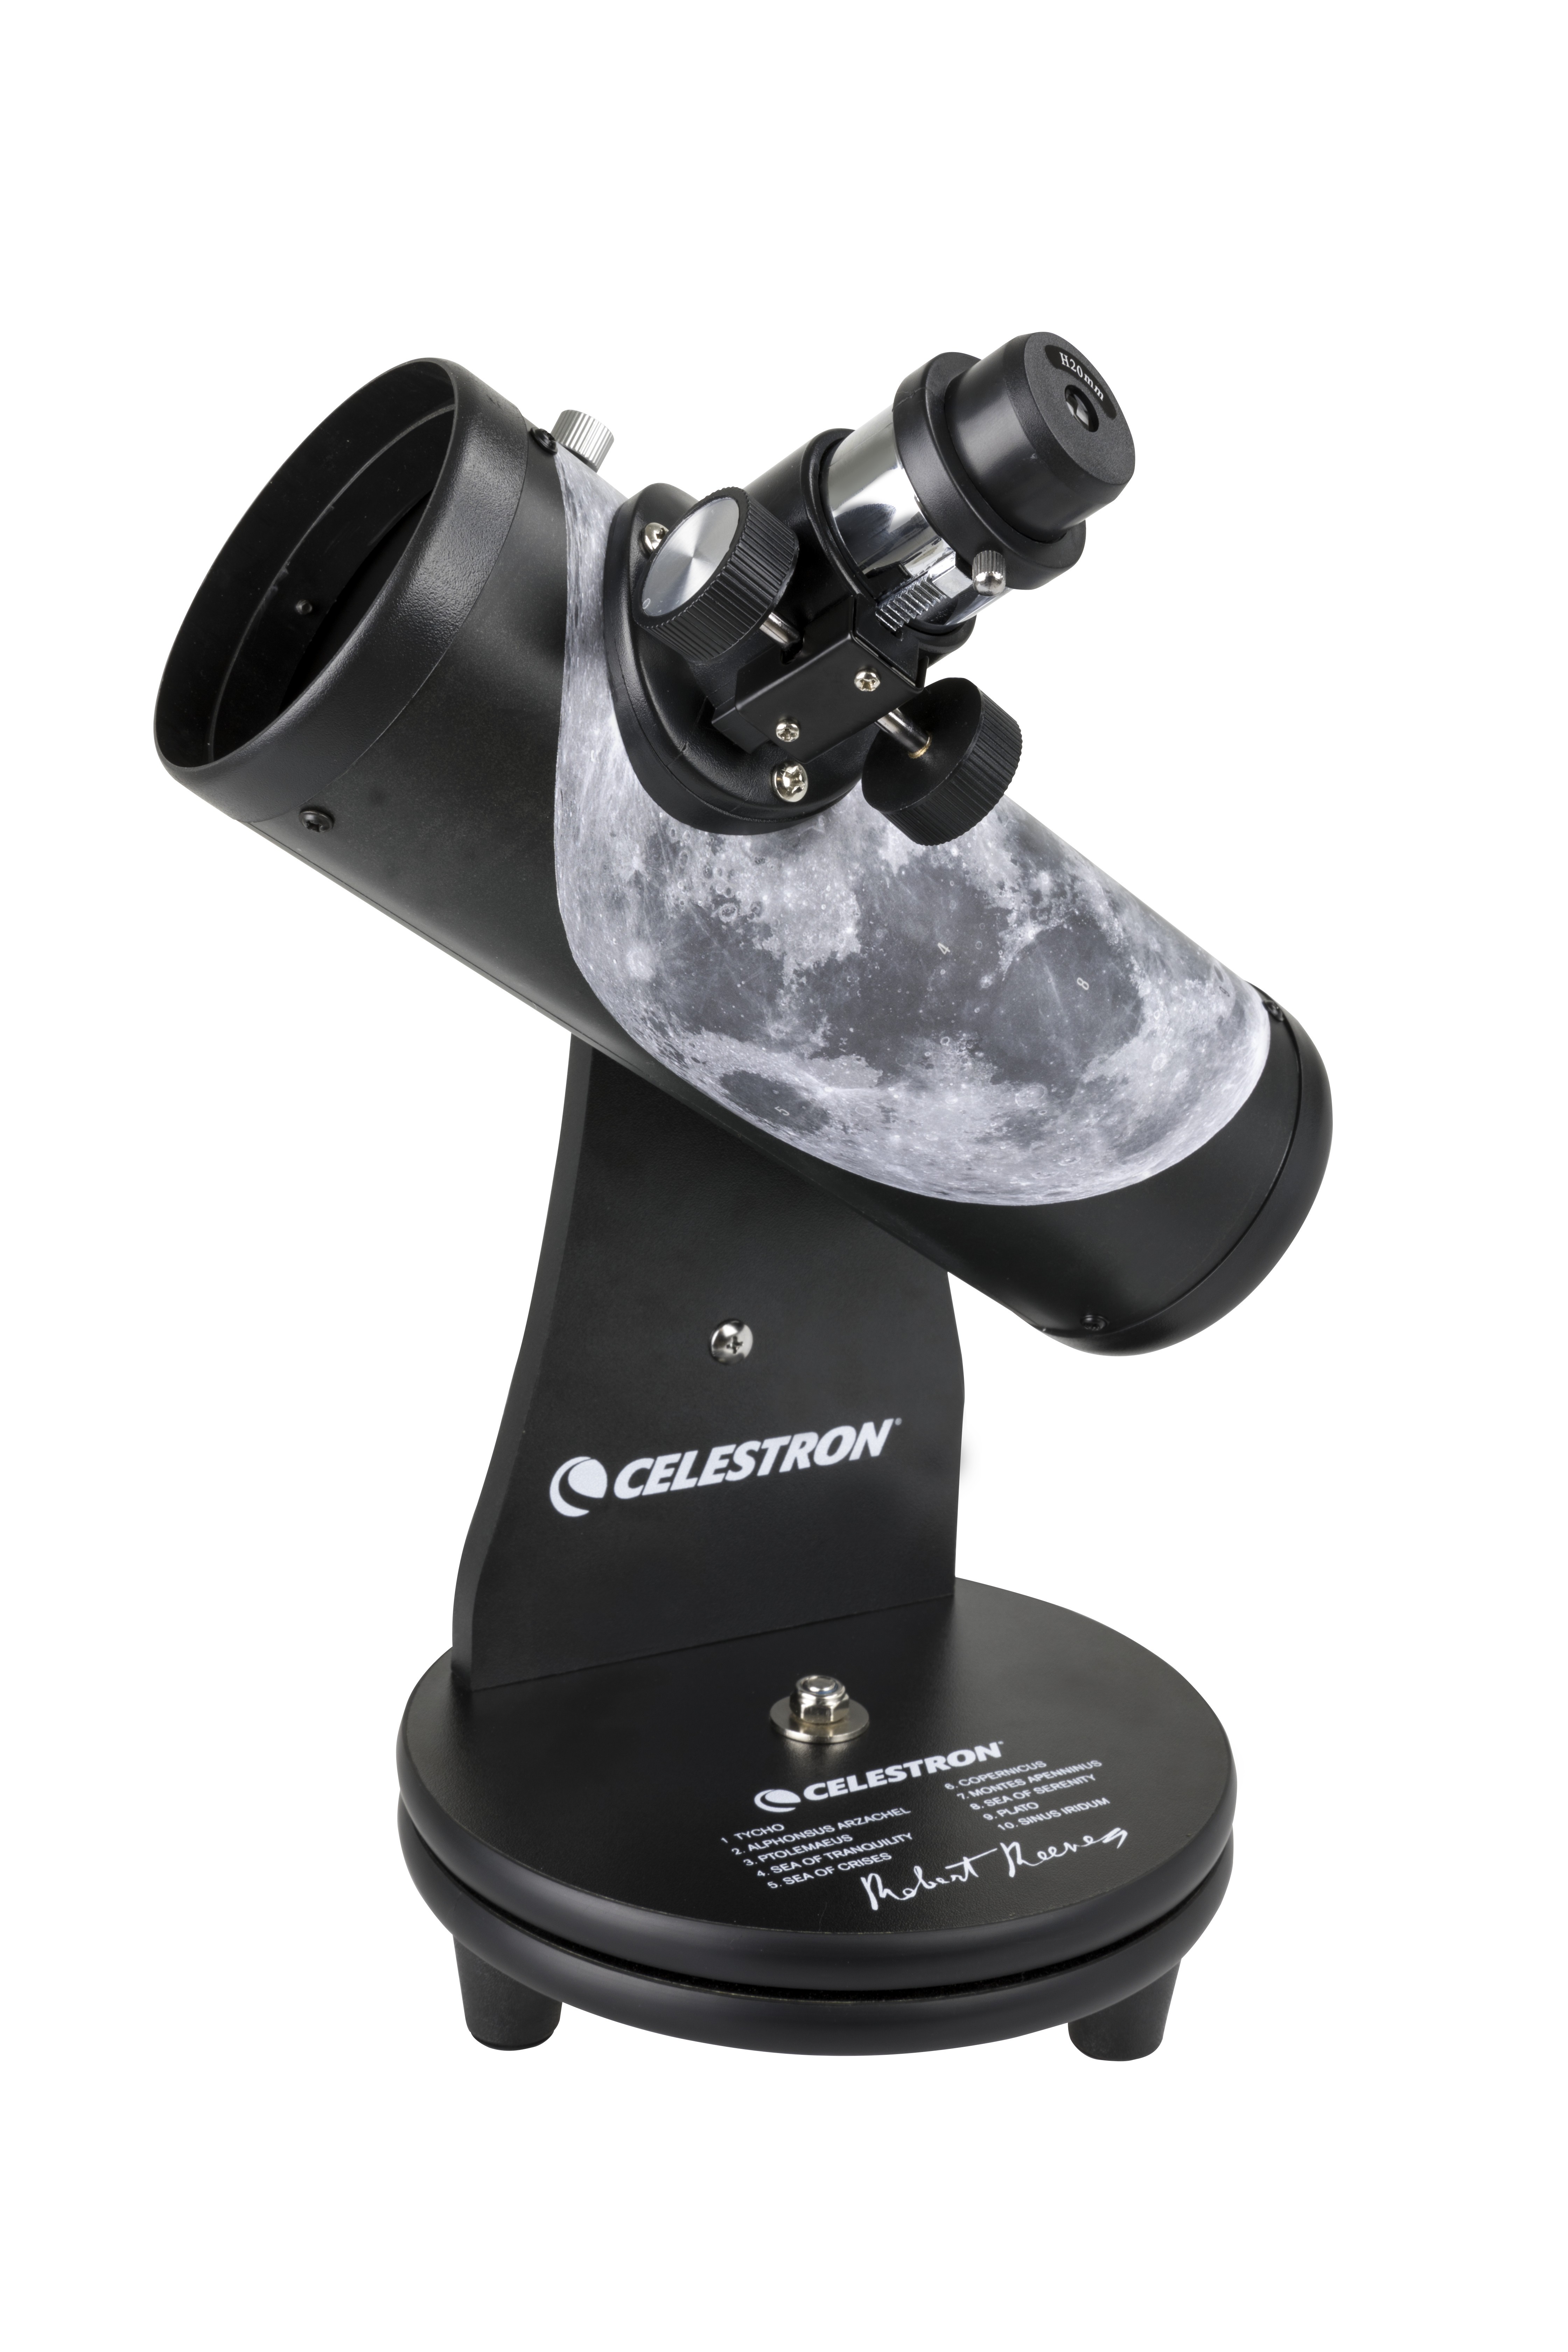 Celestron Firstscope Tabletop Telescope Robert Reeves Signature Edition